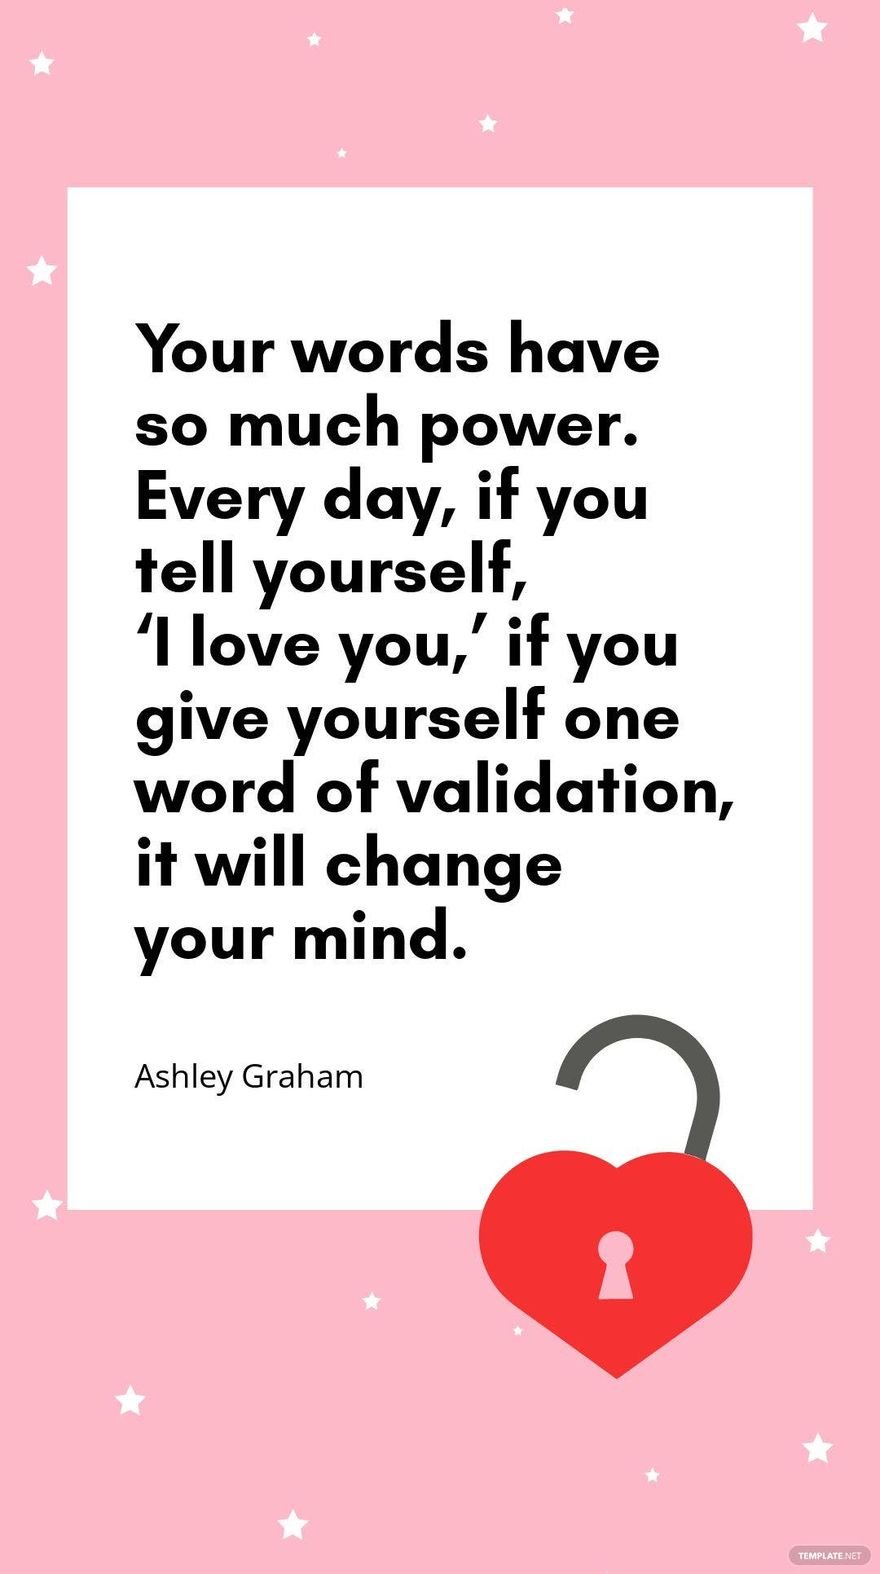 Ashley Graham - Your words have so much power. Every day, if you tell yourself, ‘I love you,’ if you give yourself one word of validation, it will change your mind.